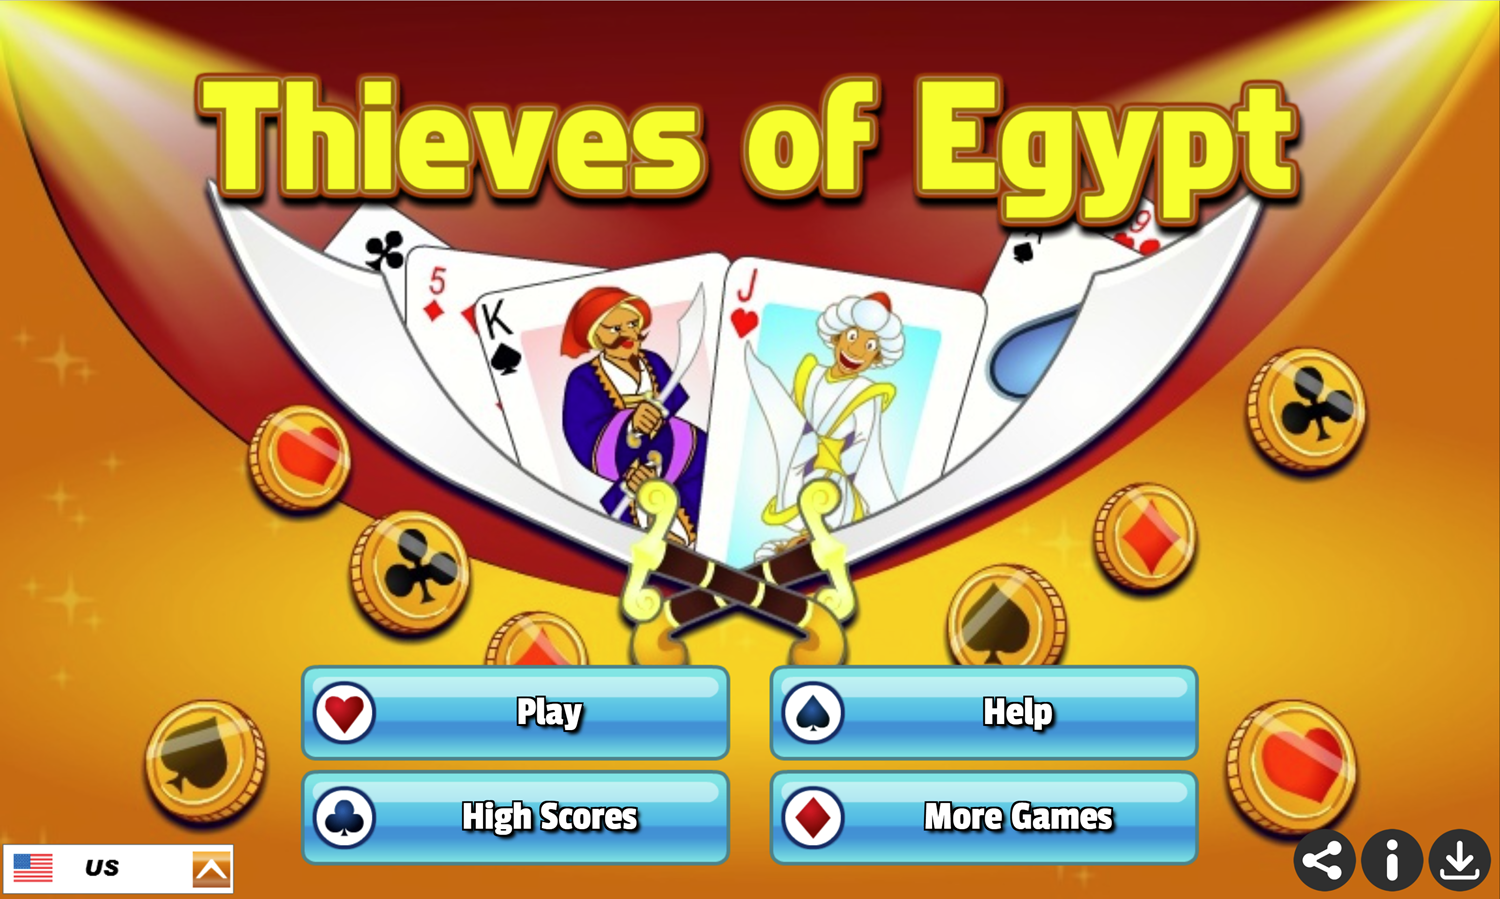 Thieves of Egypt Game Welcome Screen Screenshot.